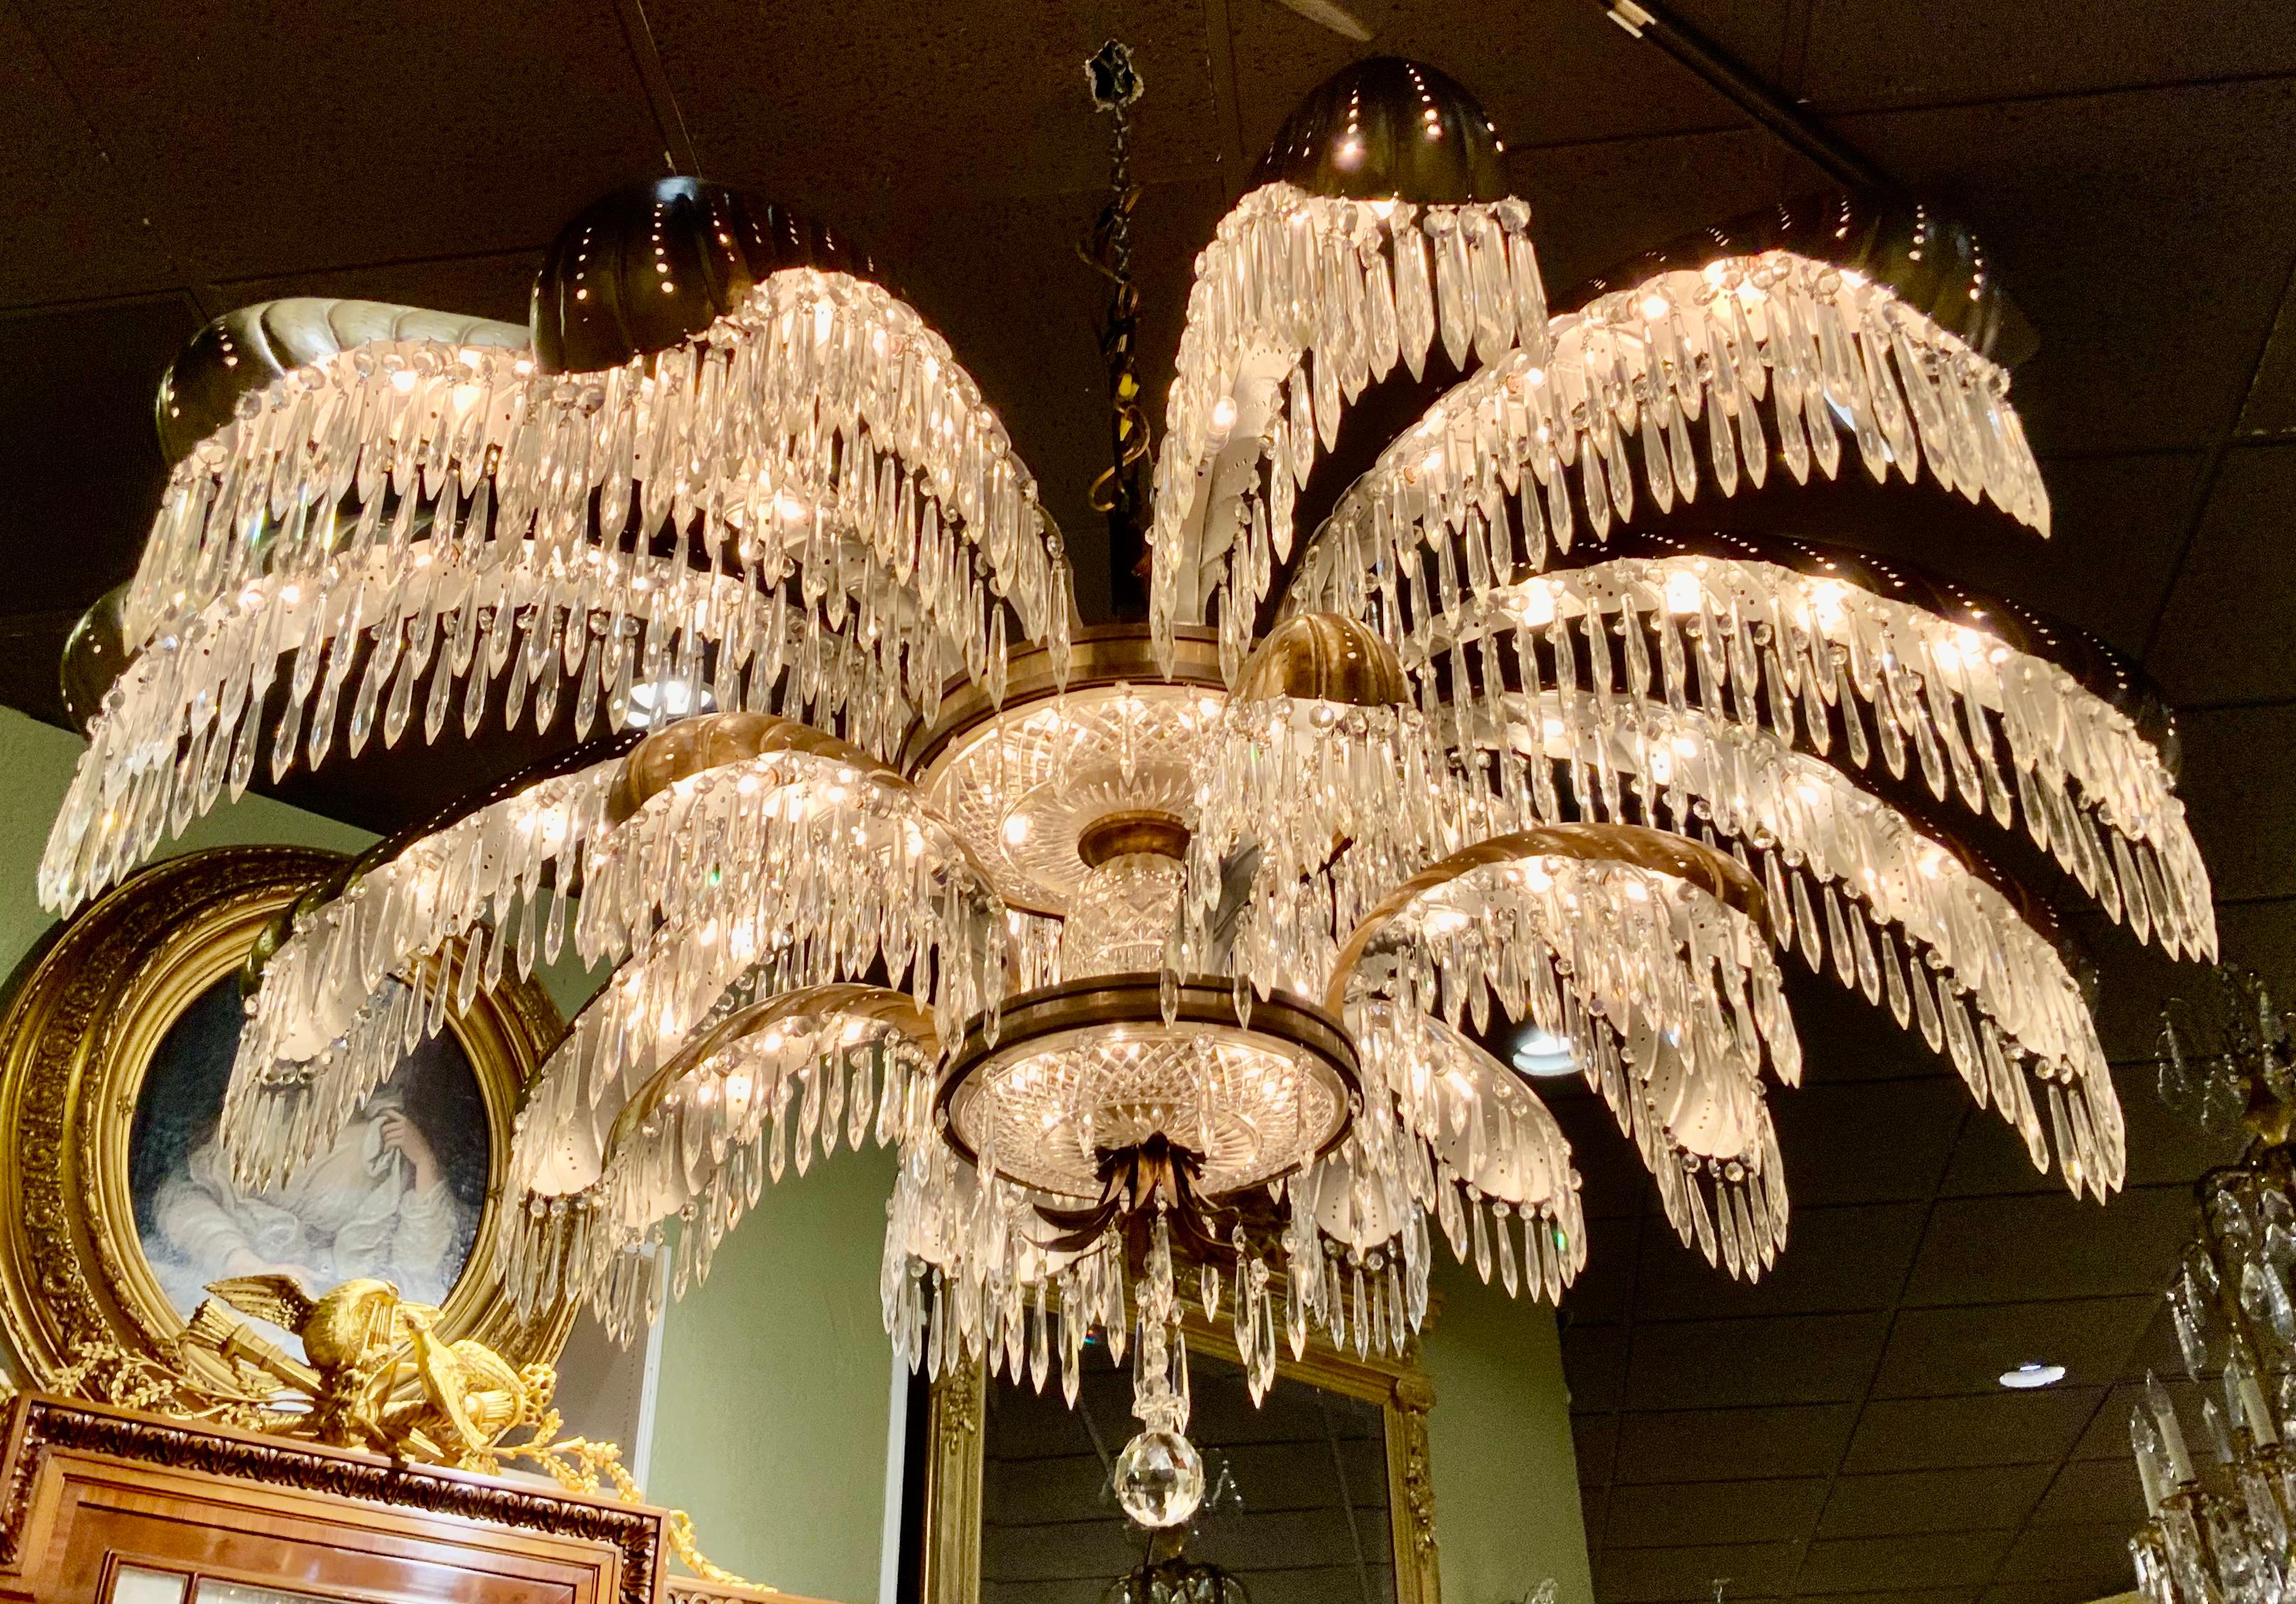 French Monumental Art Deco Chandelier with 84 Lights and 800 Crystals